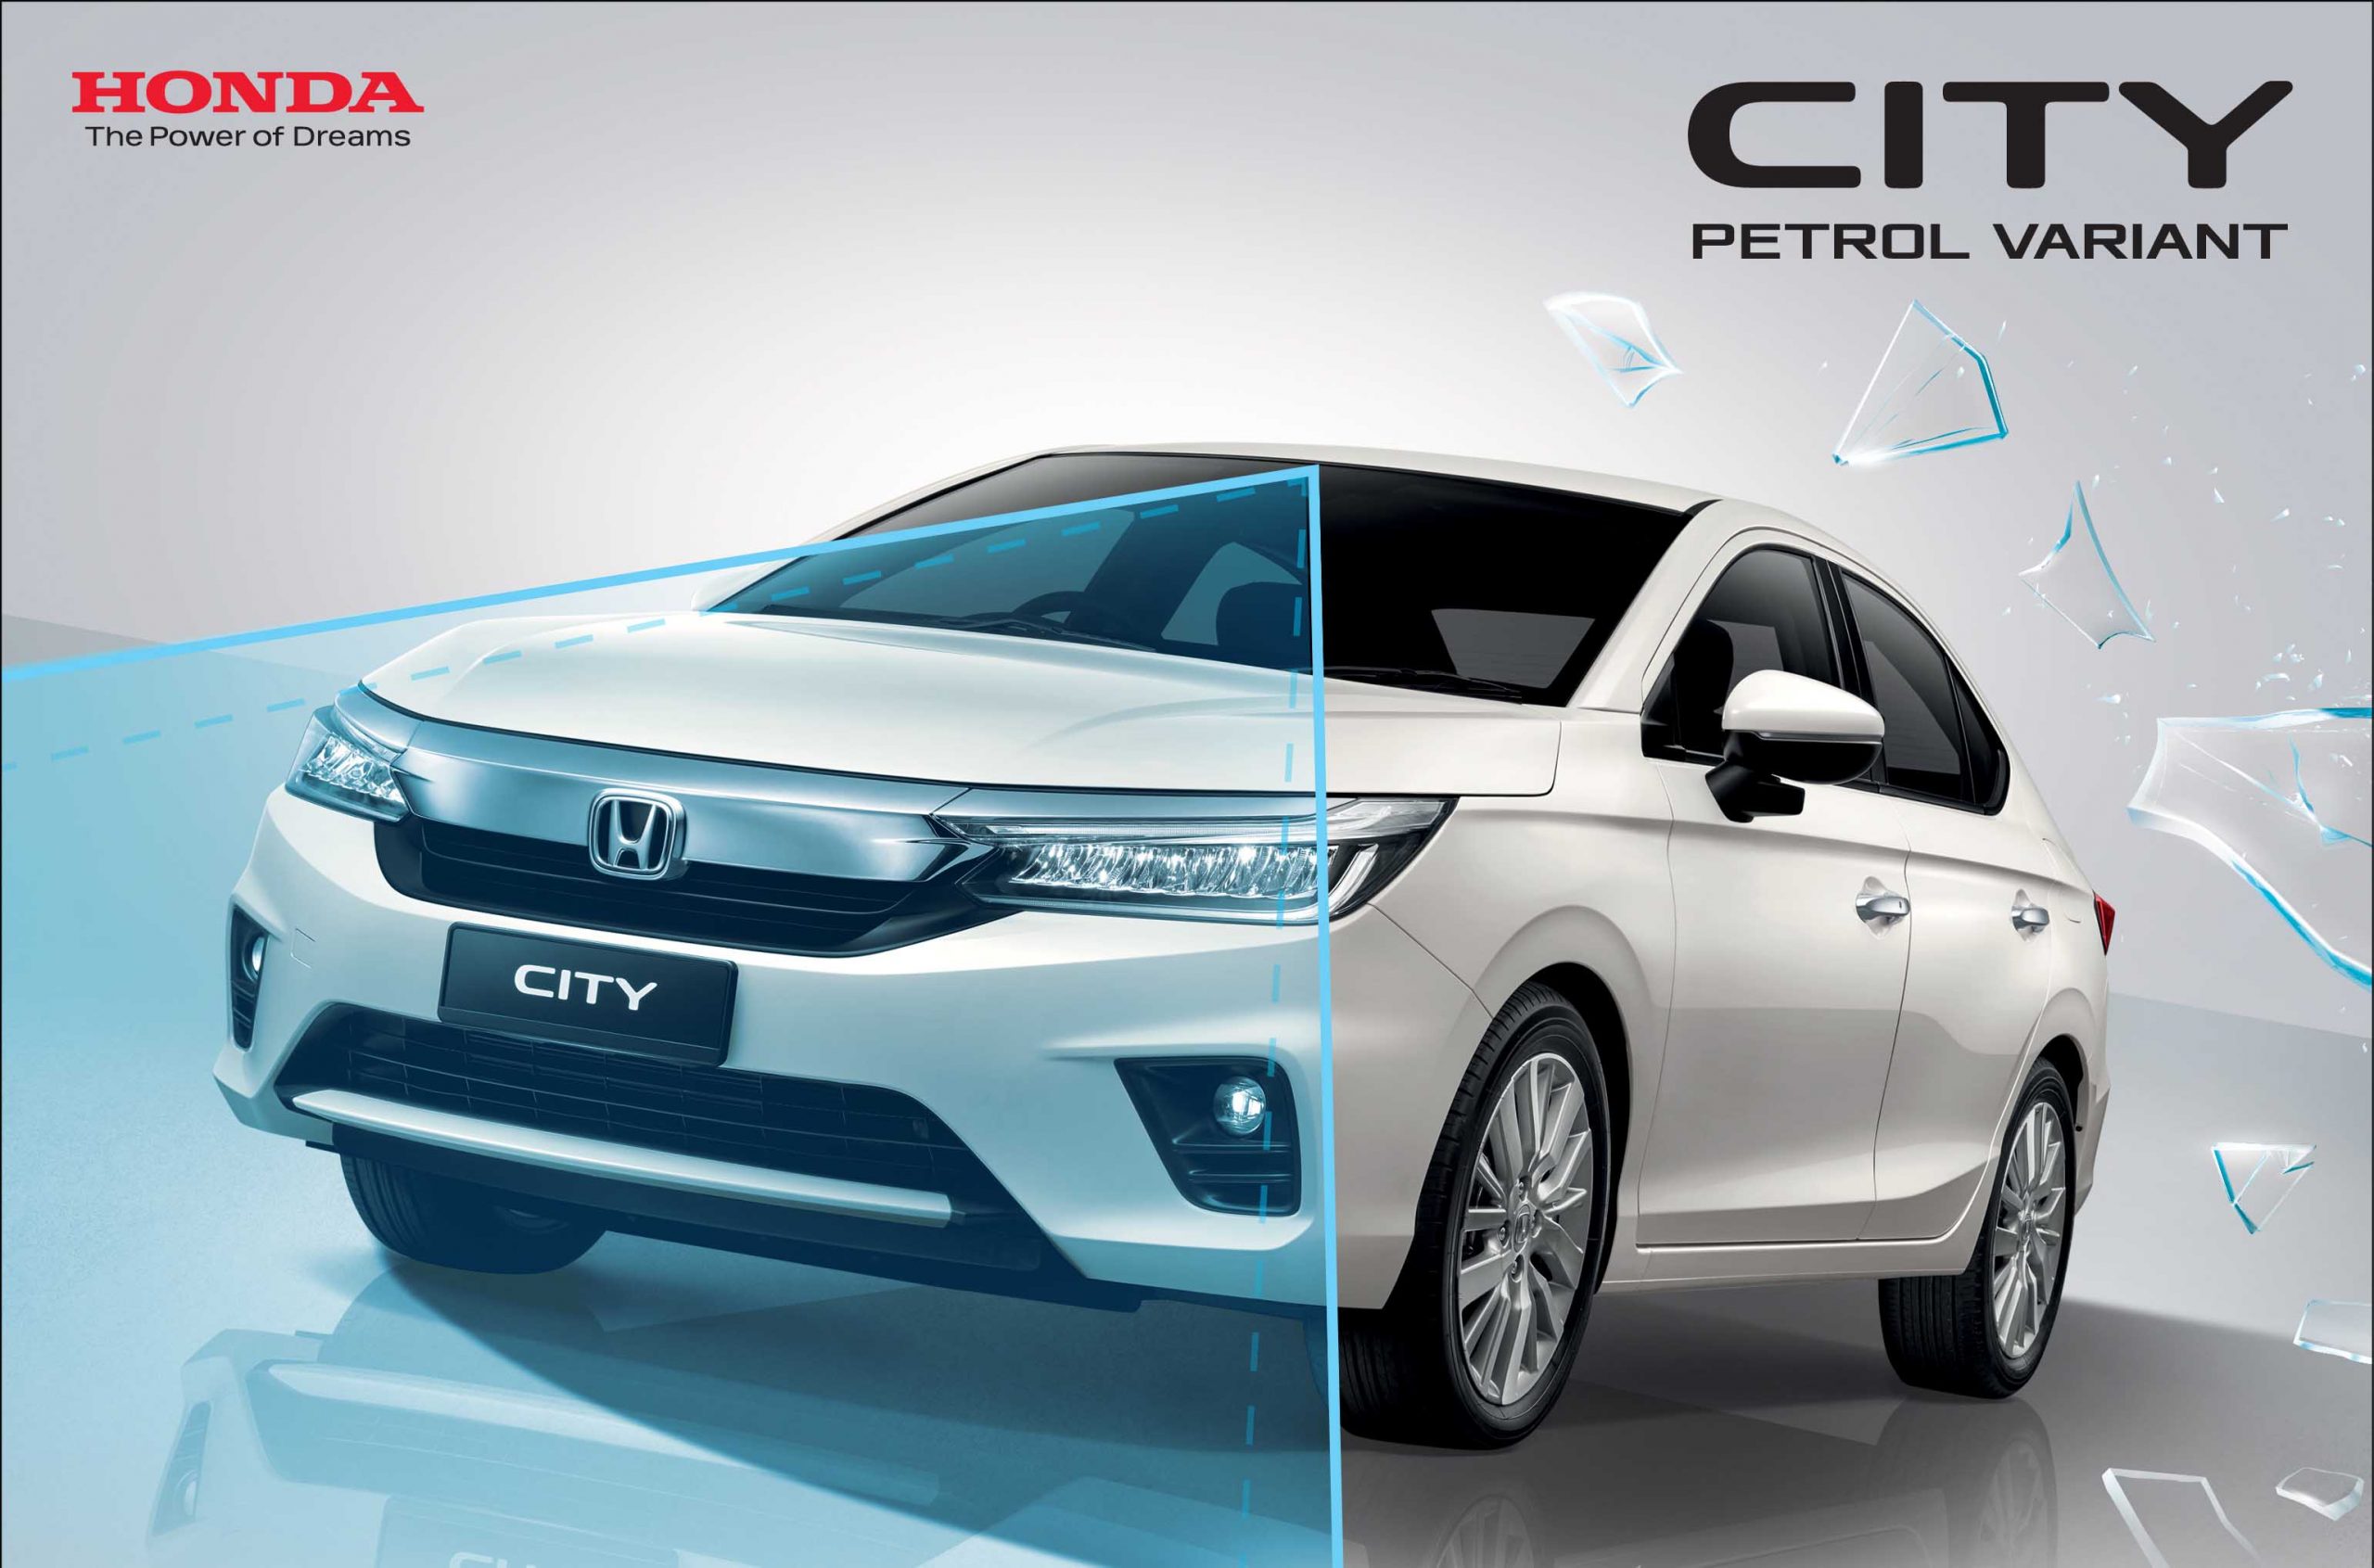 Honda Malaysia Presents New Variant For City With Next Generation Advance Safety Technology